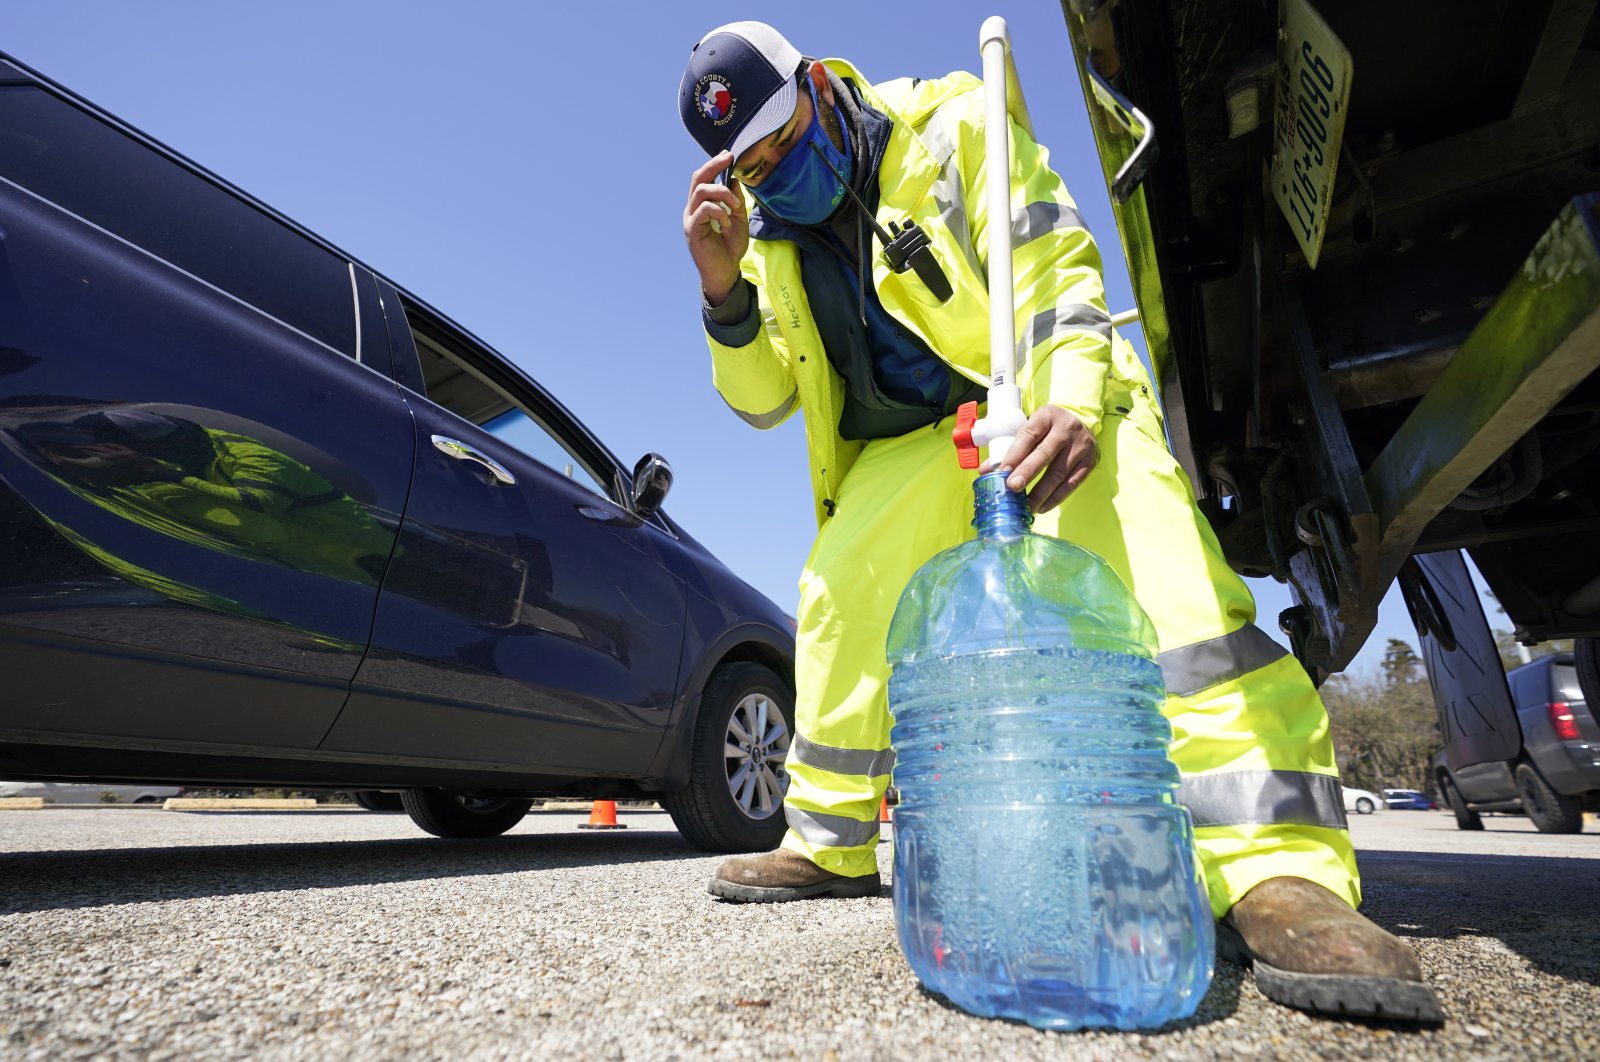 Harris County Precinct 4 employee Hector Plascencia fills containers with non-potable water at a water distribution site in Houston, Texas on Feb. 19, 2021. (AP Photo)